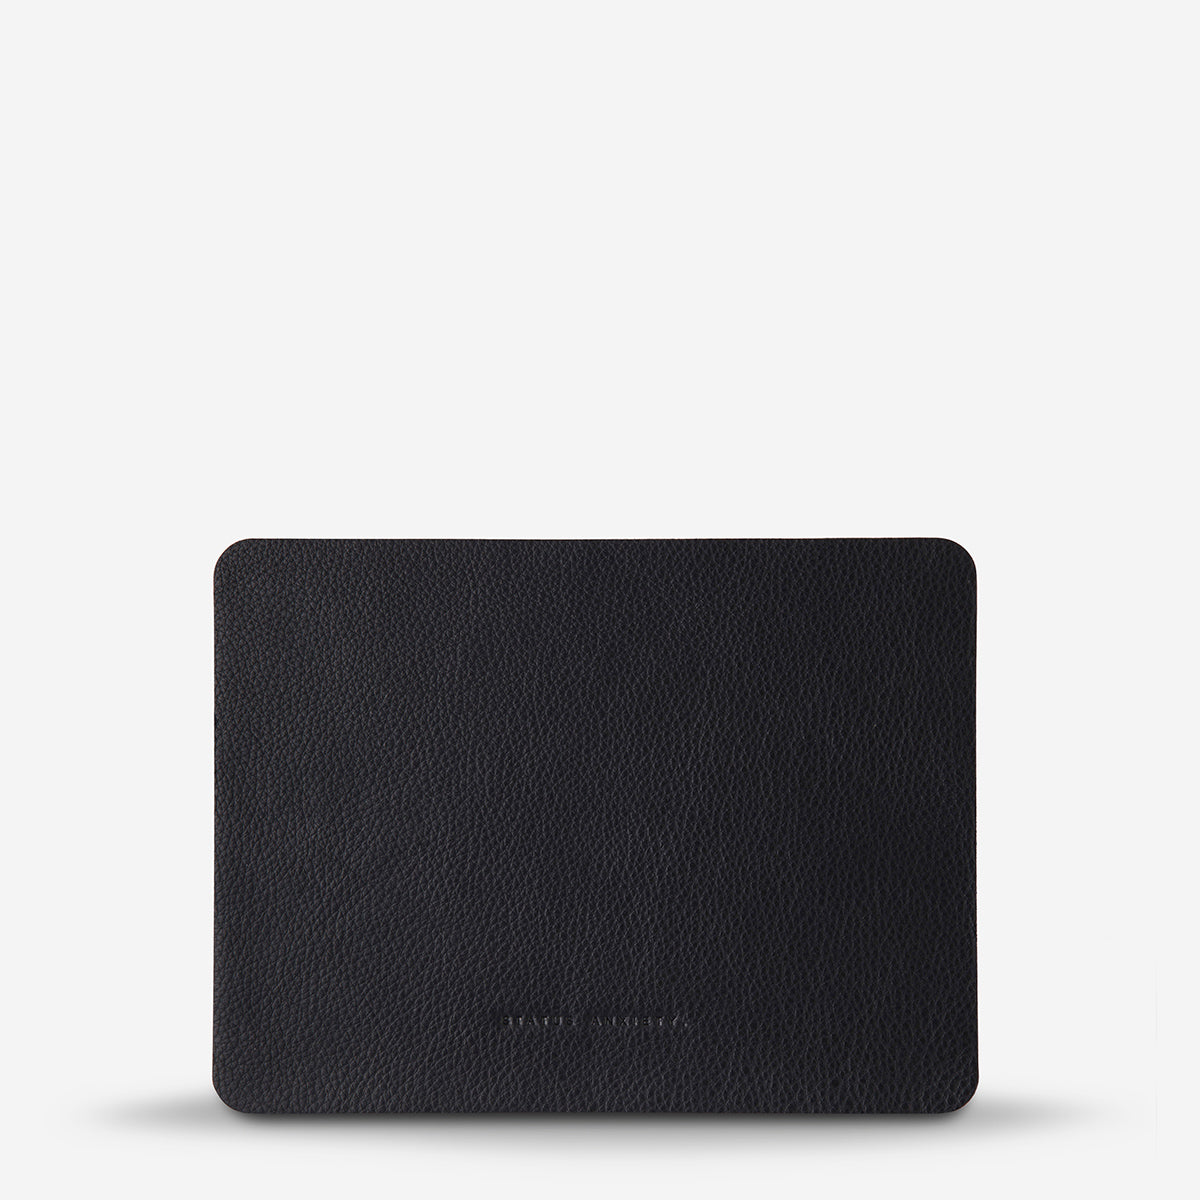 Status Anxiety Of Sound Mind Leather Mouse Pad Black